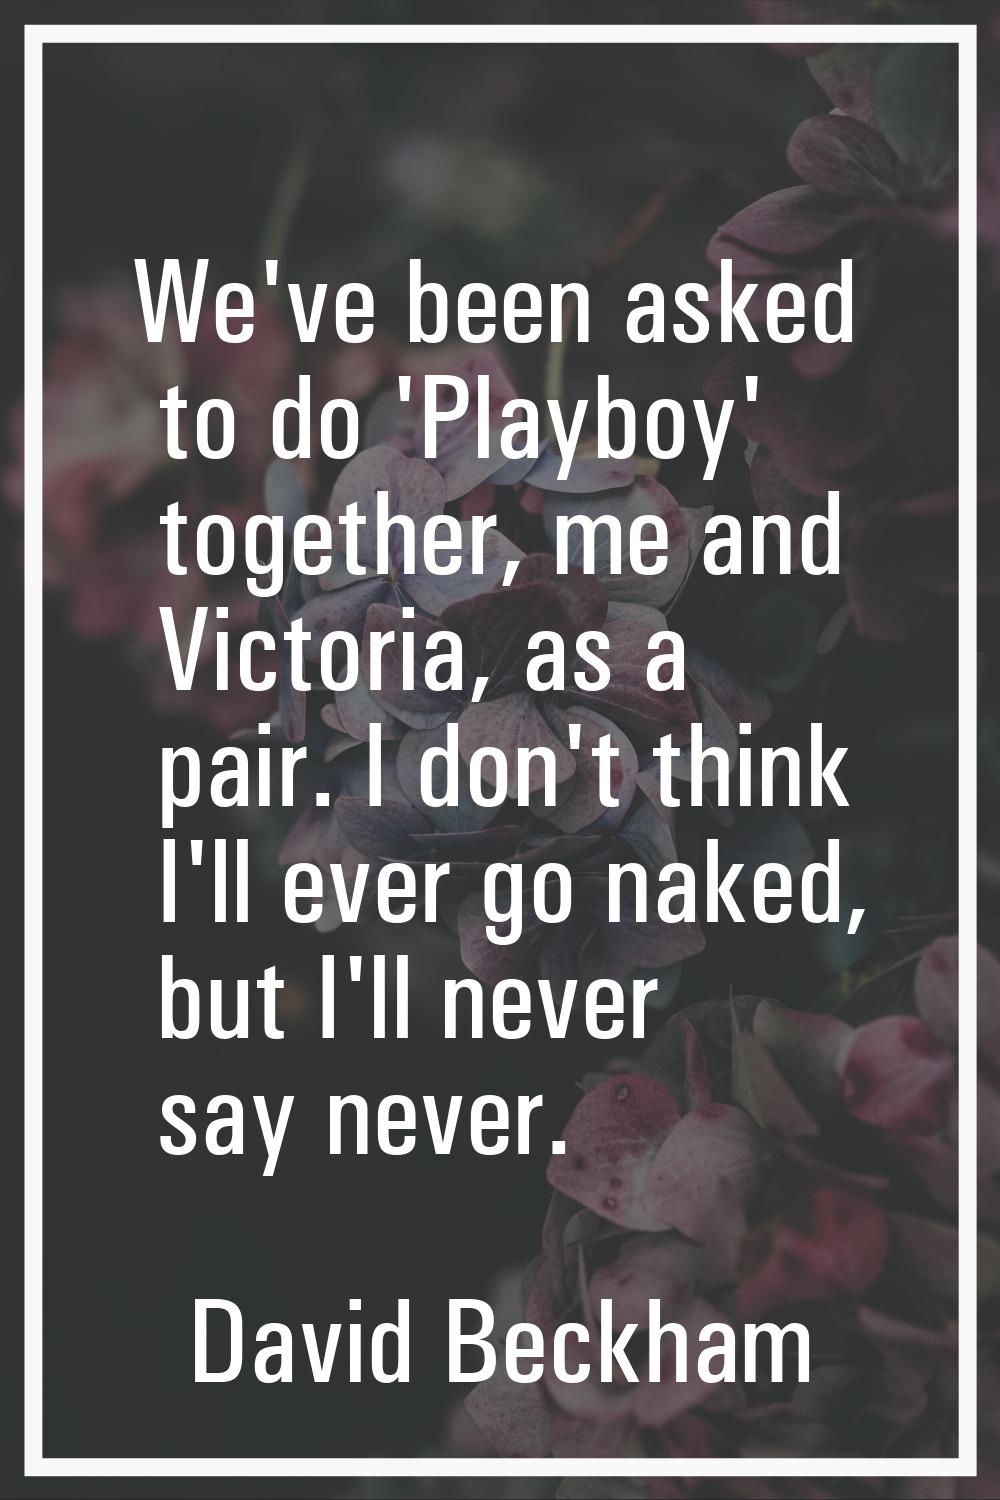 We've been asked to do 'Playboy' together, me and Victoria, as a pair. I don't think I'll ever go n